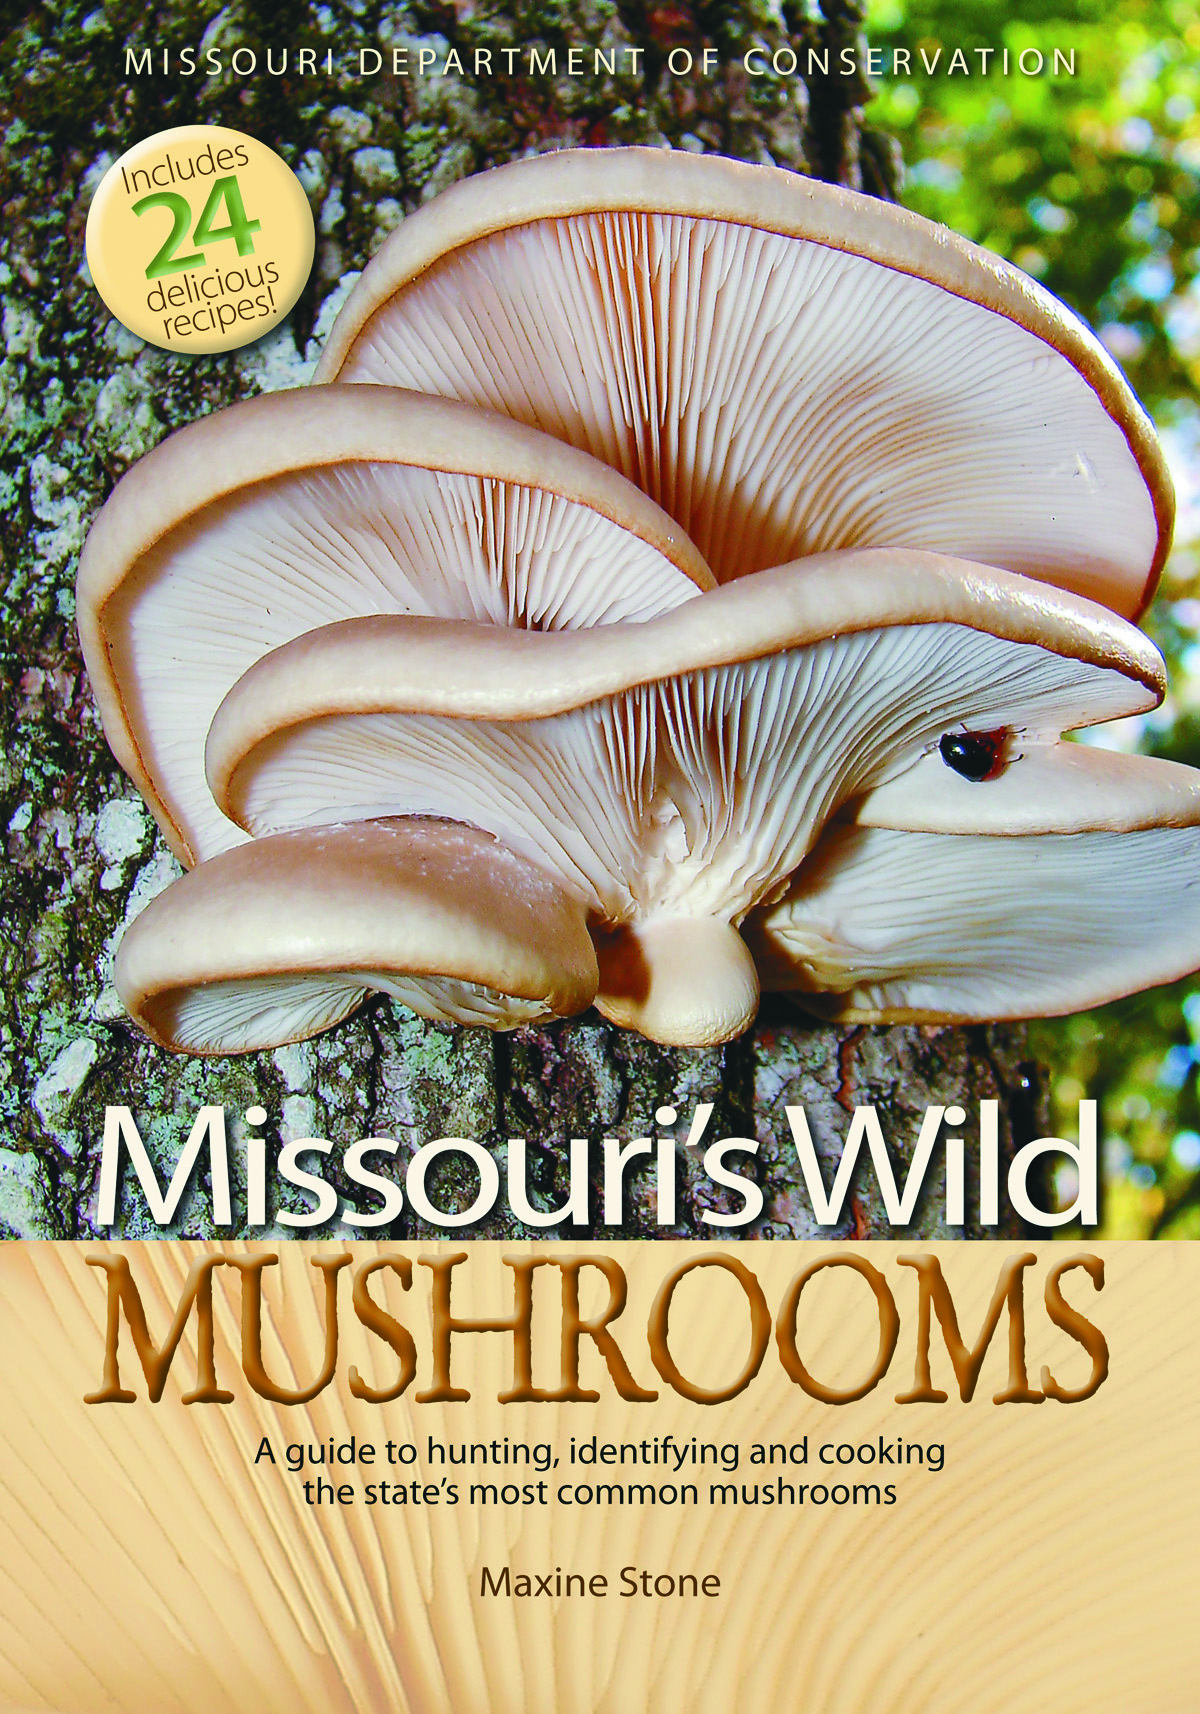 MDC offers new guidebooks on mushrooms and herps | Missouri ...